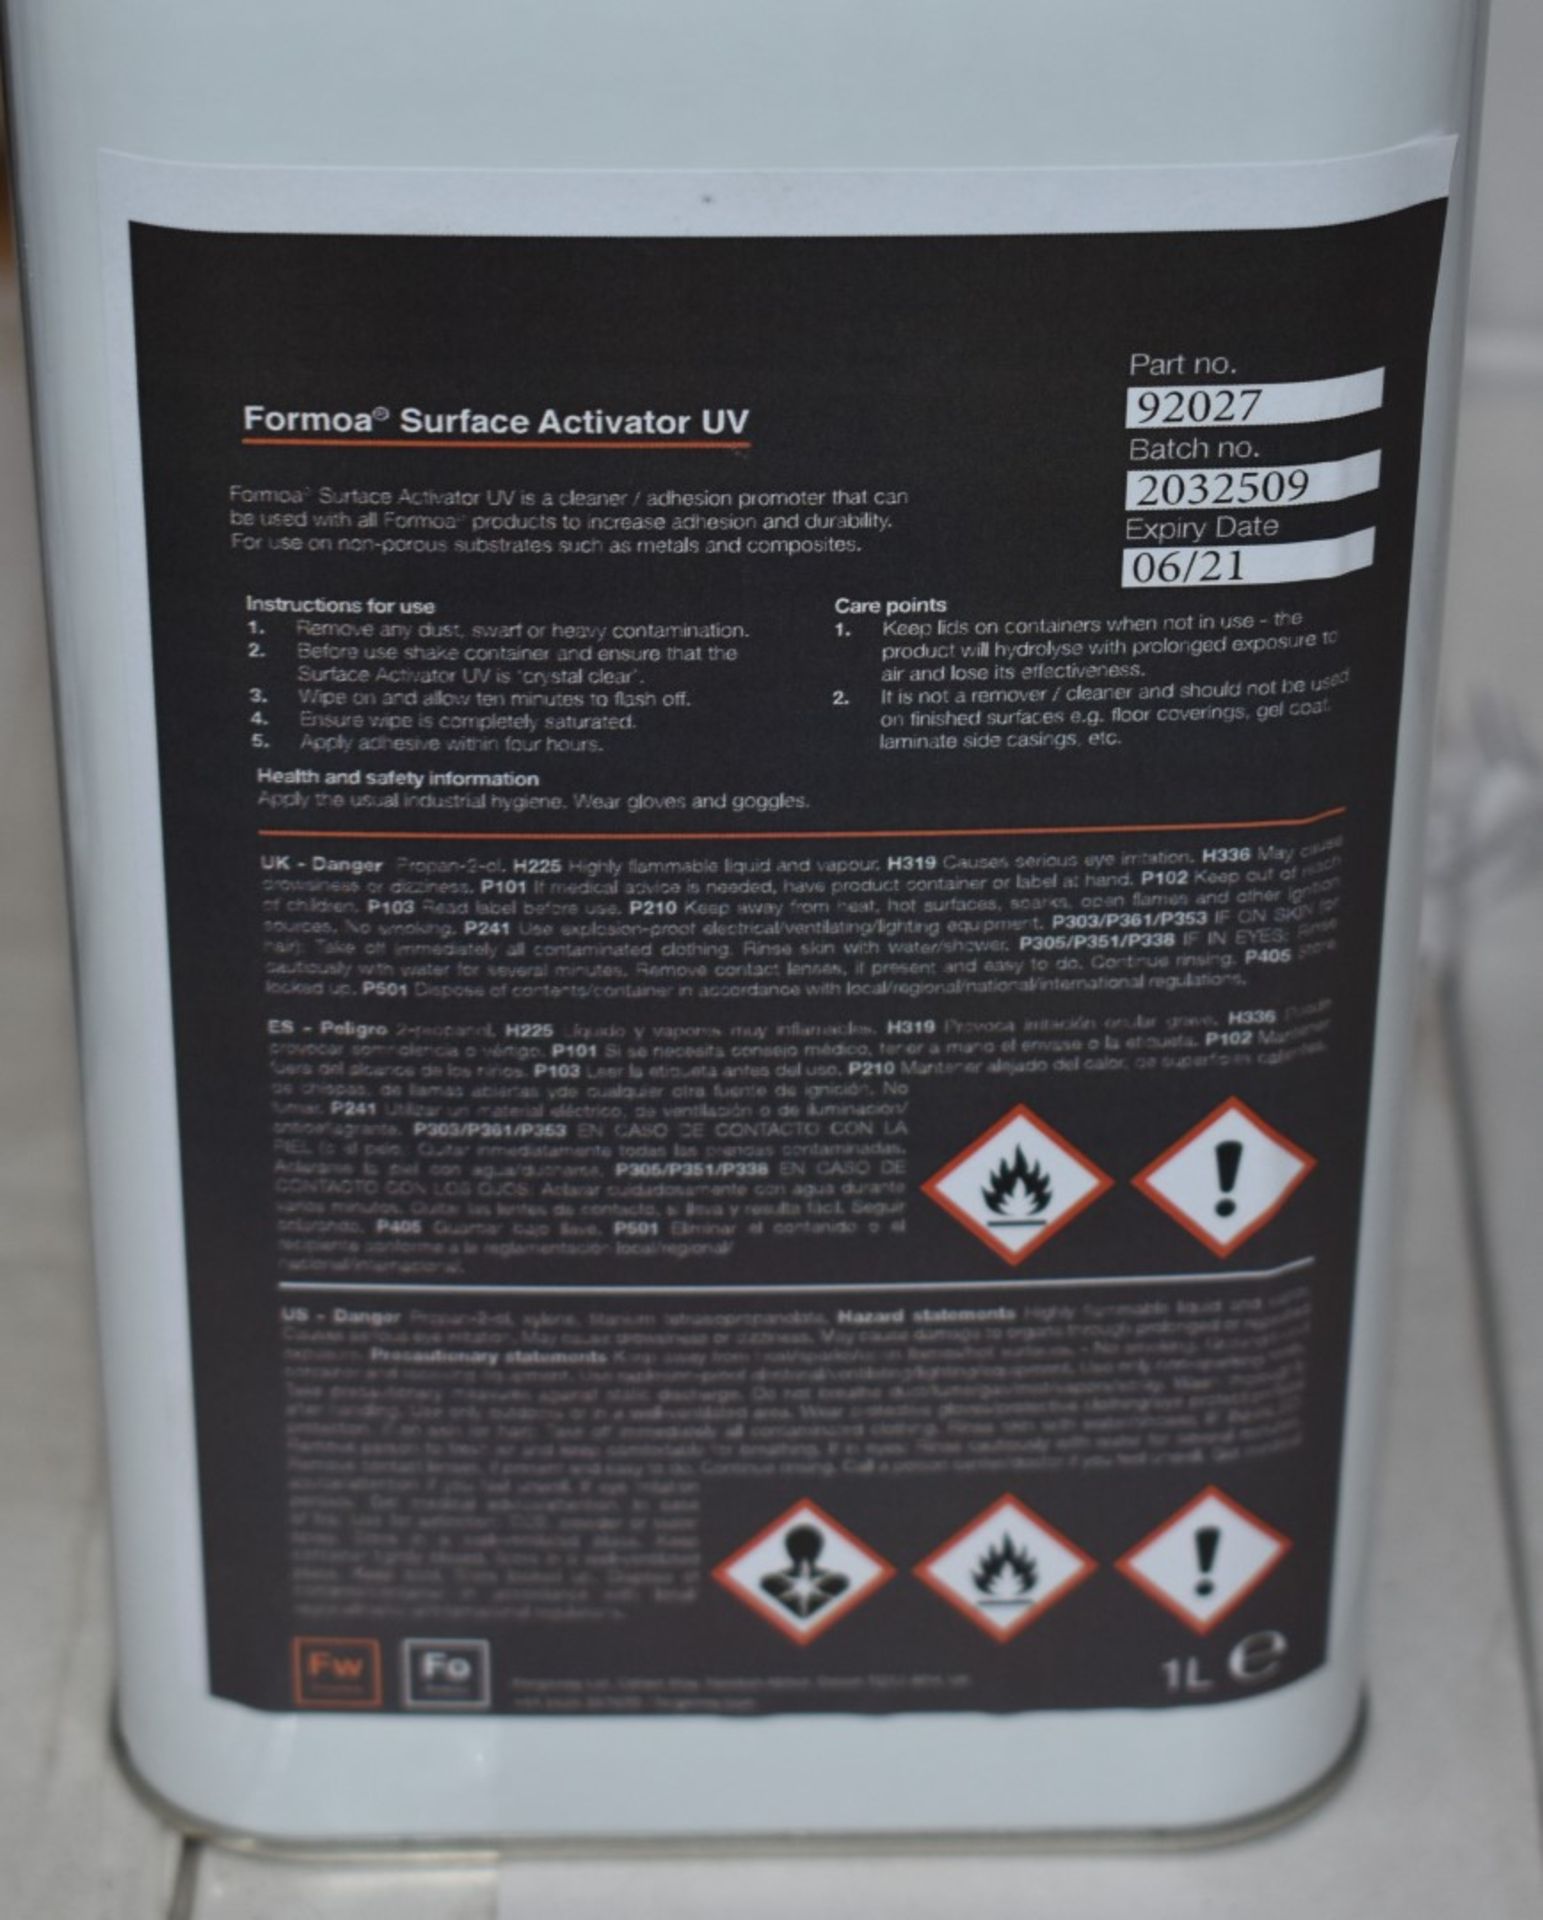 60 x Forgeway Formoa Surface Activator 1 Litre Containers - Adhesion Promotor, Cleaner, Degreaser - Image 4 of 7